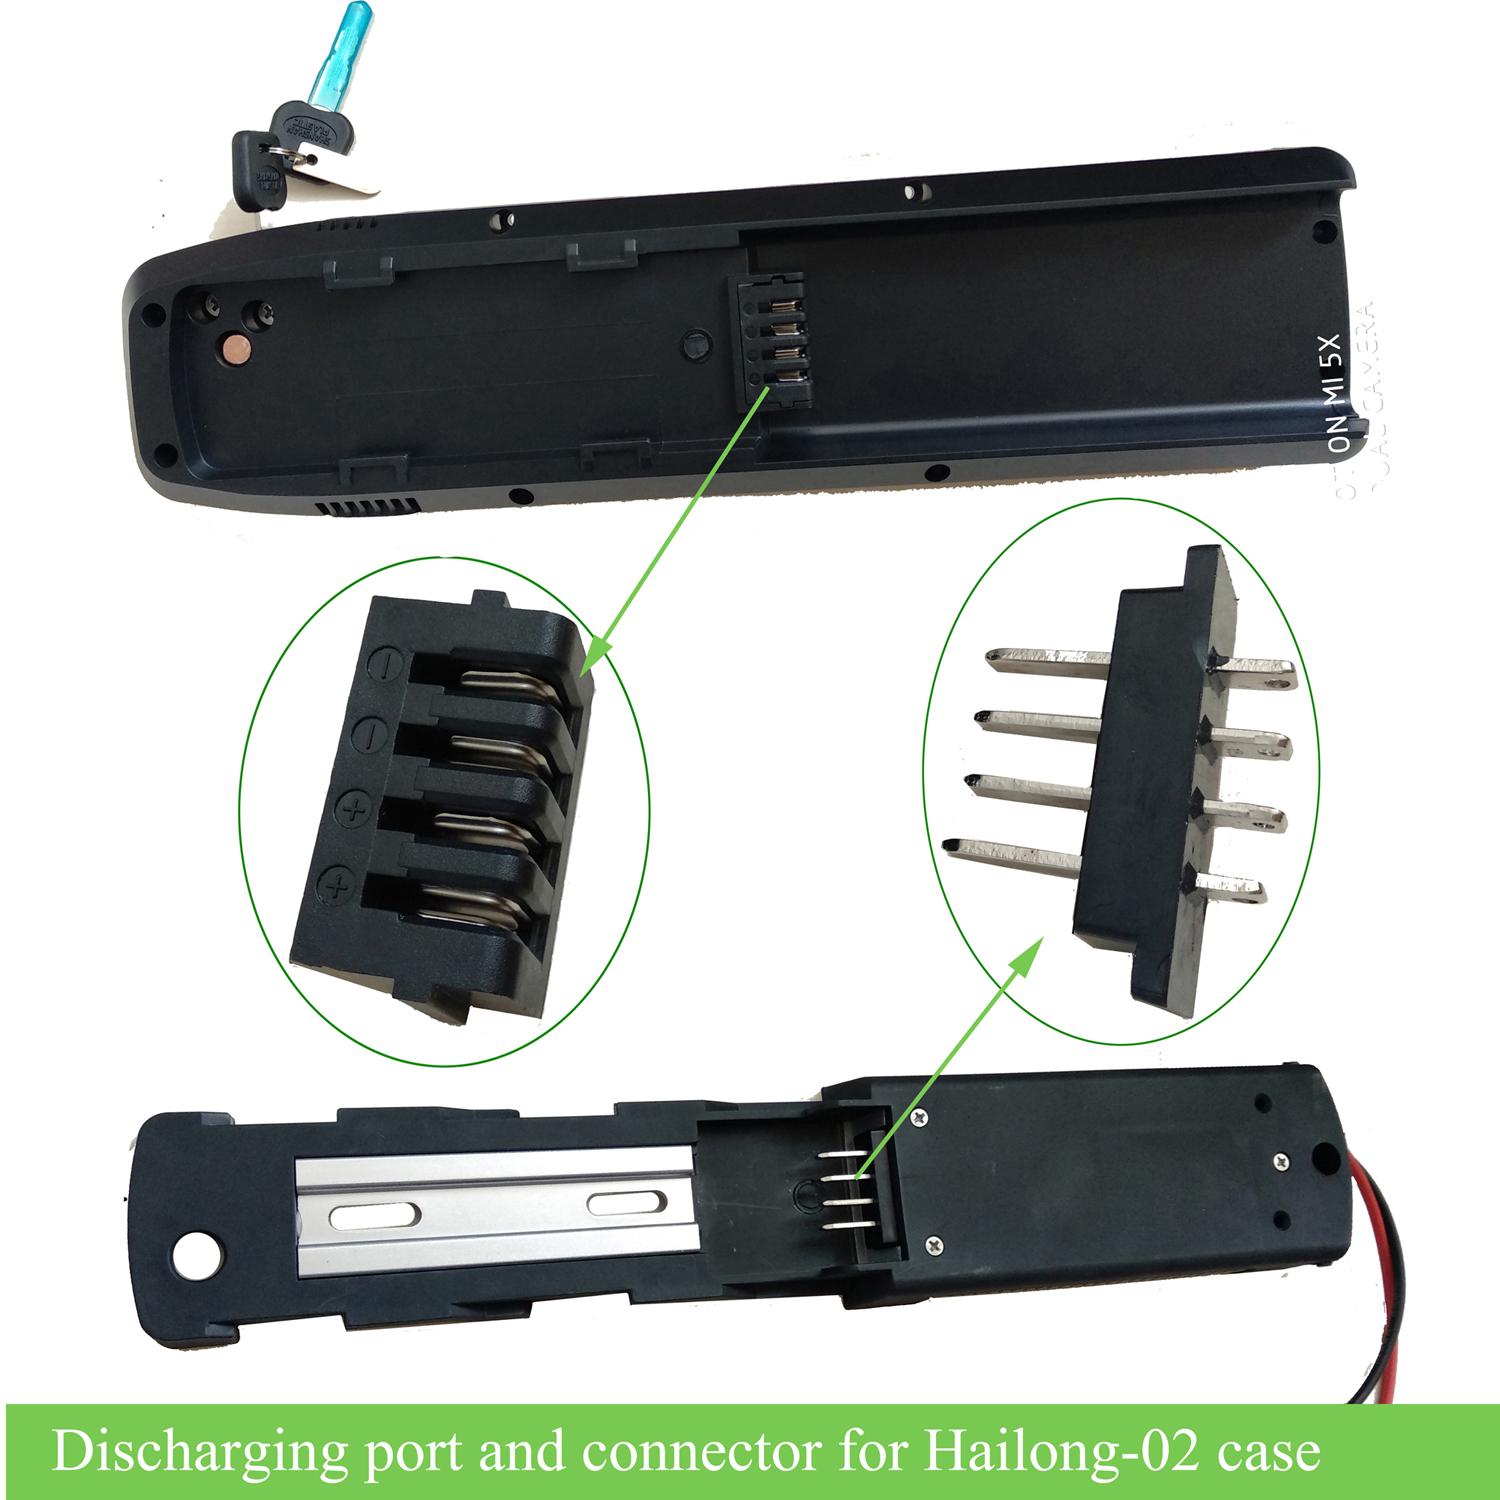 48V hailong-1, tigershark, new polly frame battery charger 120W 54.6V 2A  with 2.1DC connector-Greenbikekit BBS, ebike batteries, Bafang M620, Bafang  M600, Bafang M500, Bafang M510, KT controller with display